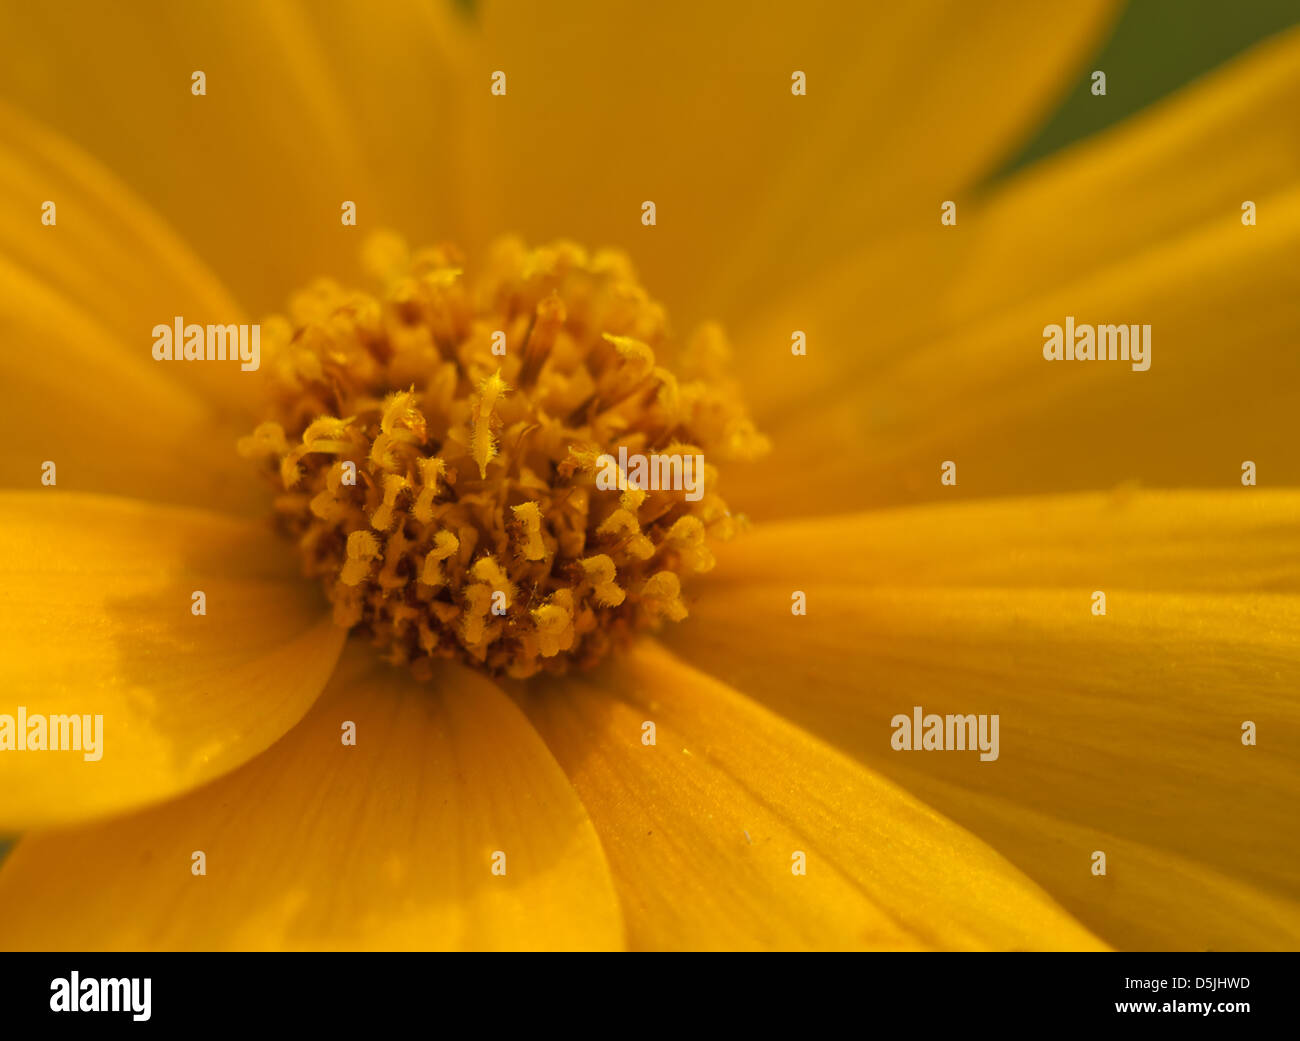 Closeup image of a bright yellow Coreopsis flower Stock Photo